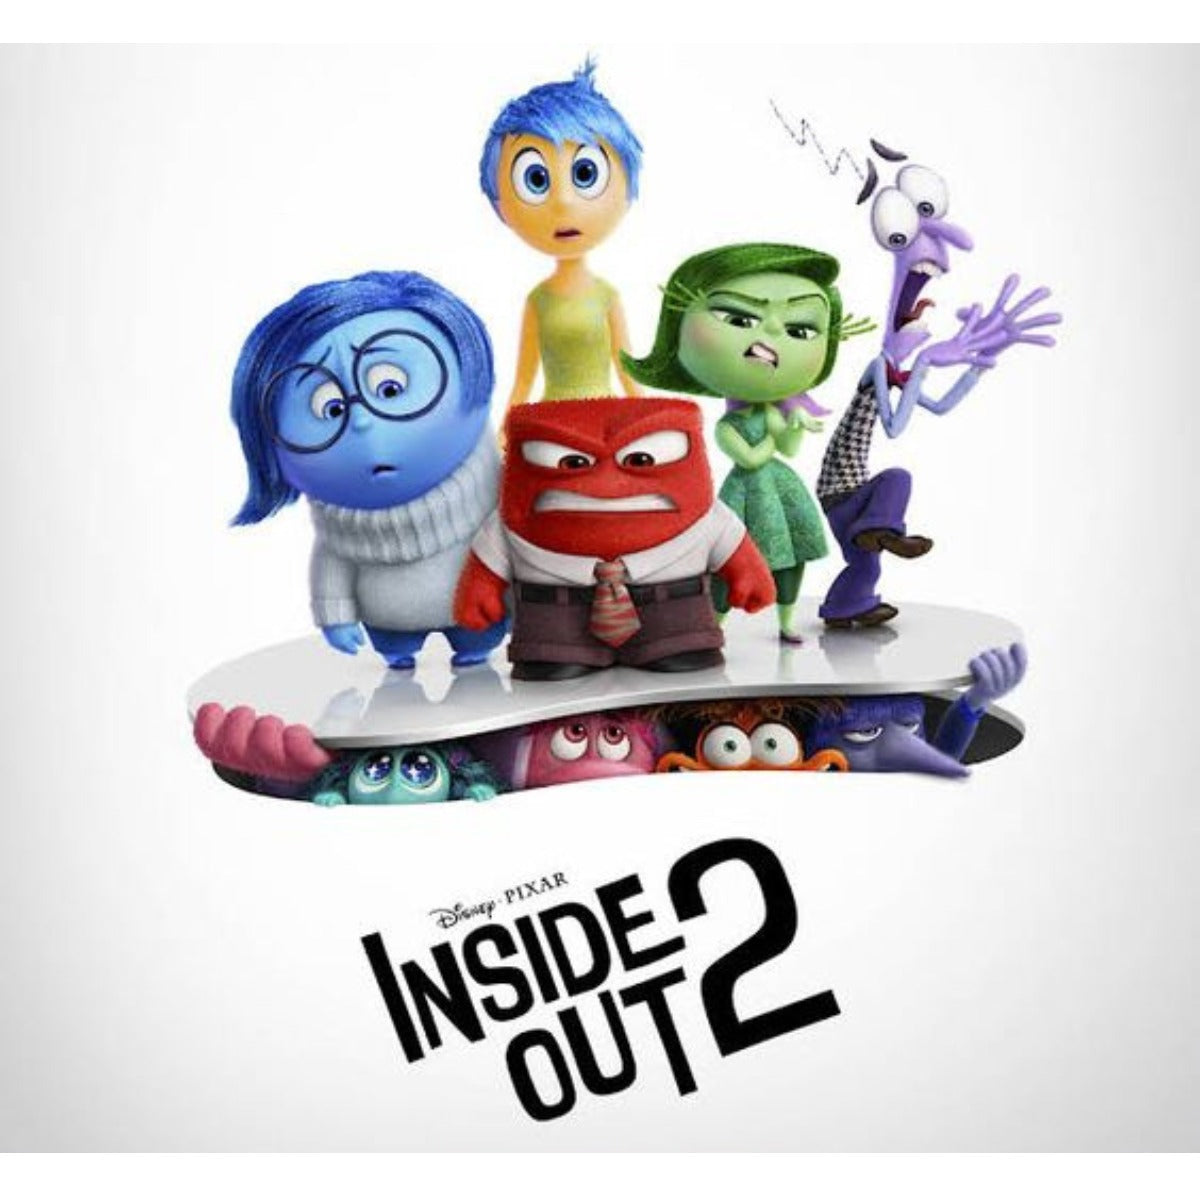 The Inside Story: Why Inside Out 2's Director Made the Tough Call to Cut a Key Emotion